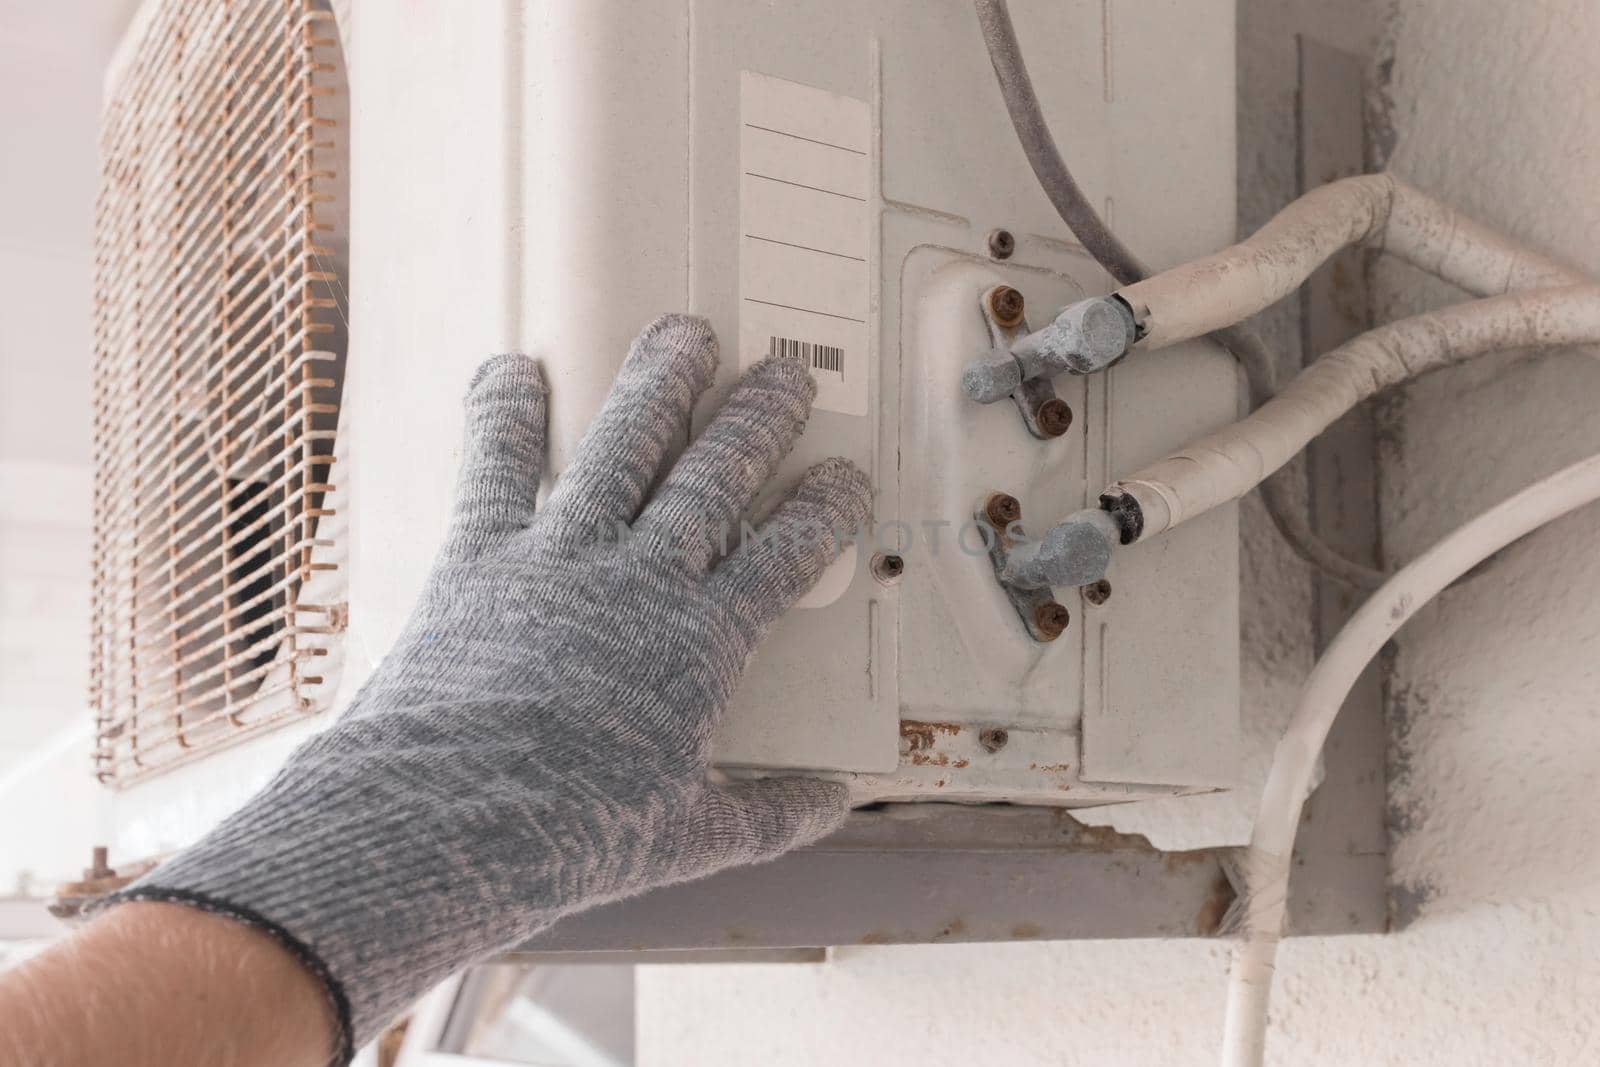 The hand of an air conditioner repair and maintenance specialist in a construction glove working with air-conditioned old equipment by AYDO8